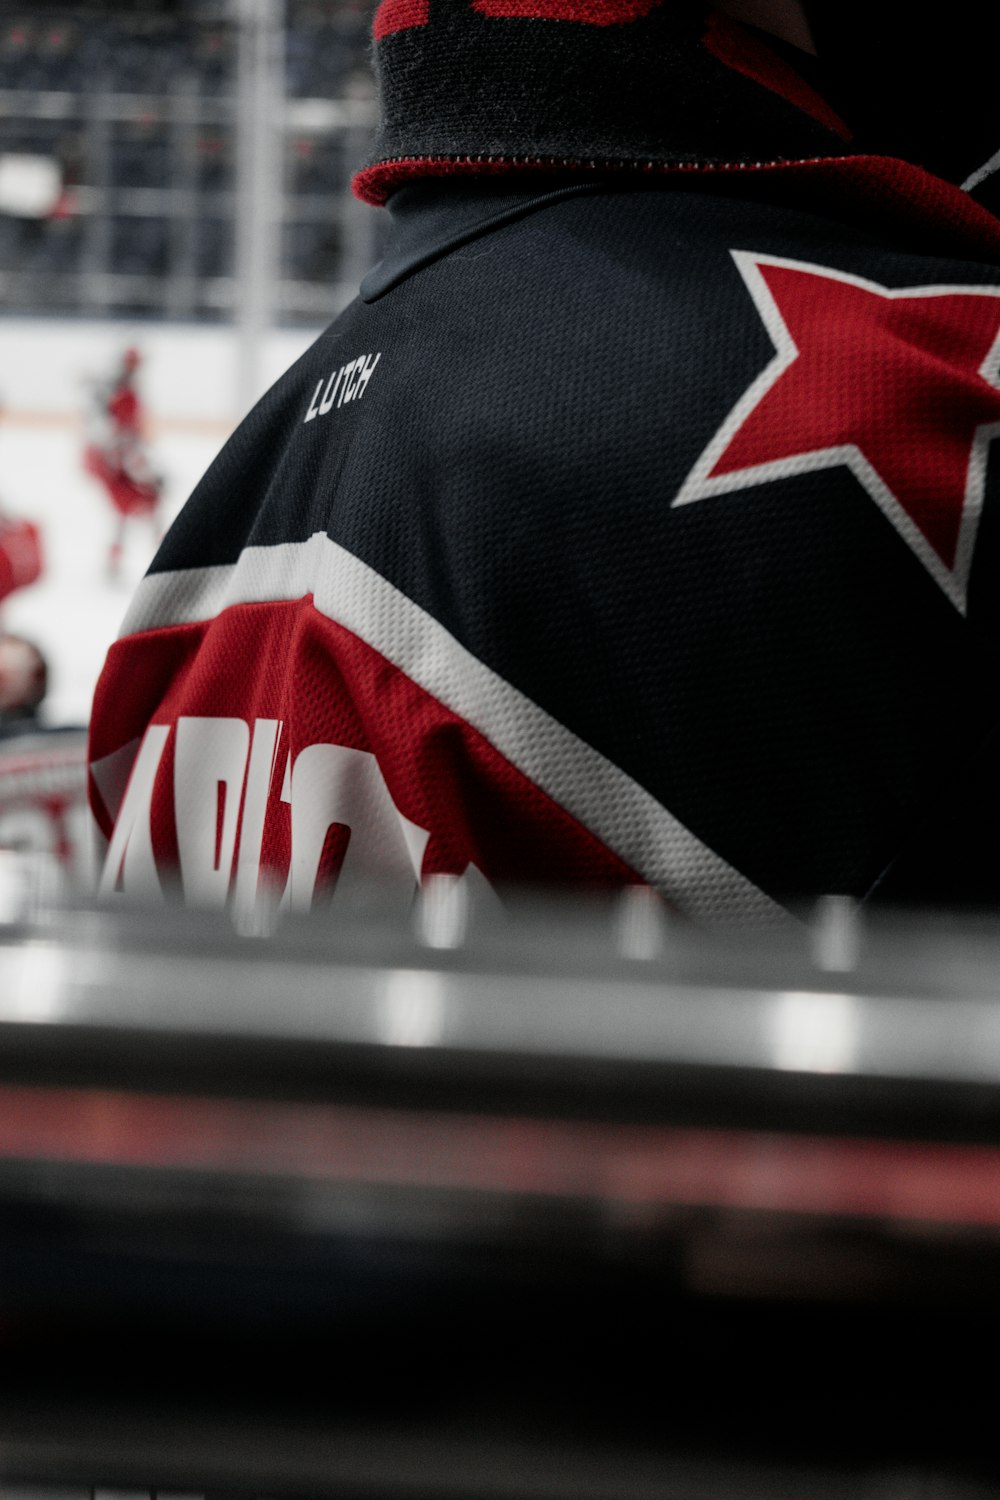 a hockey player wearing a red star jersey